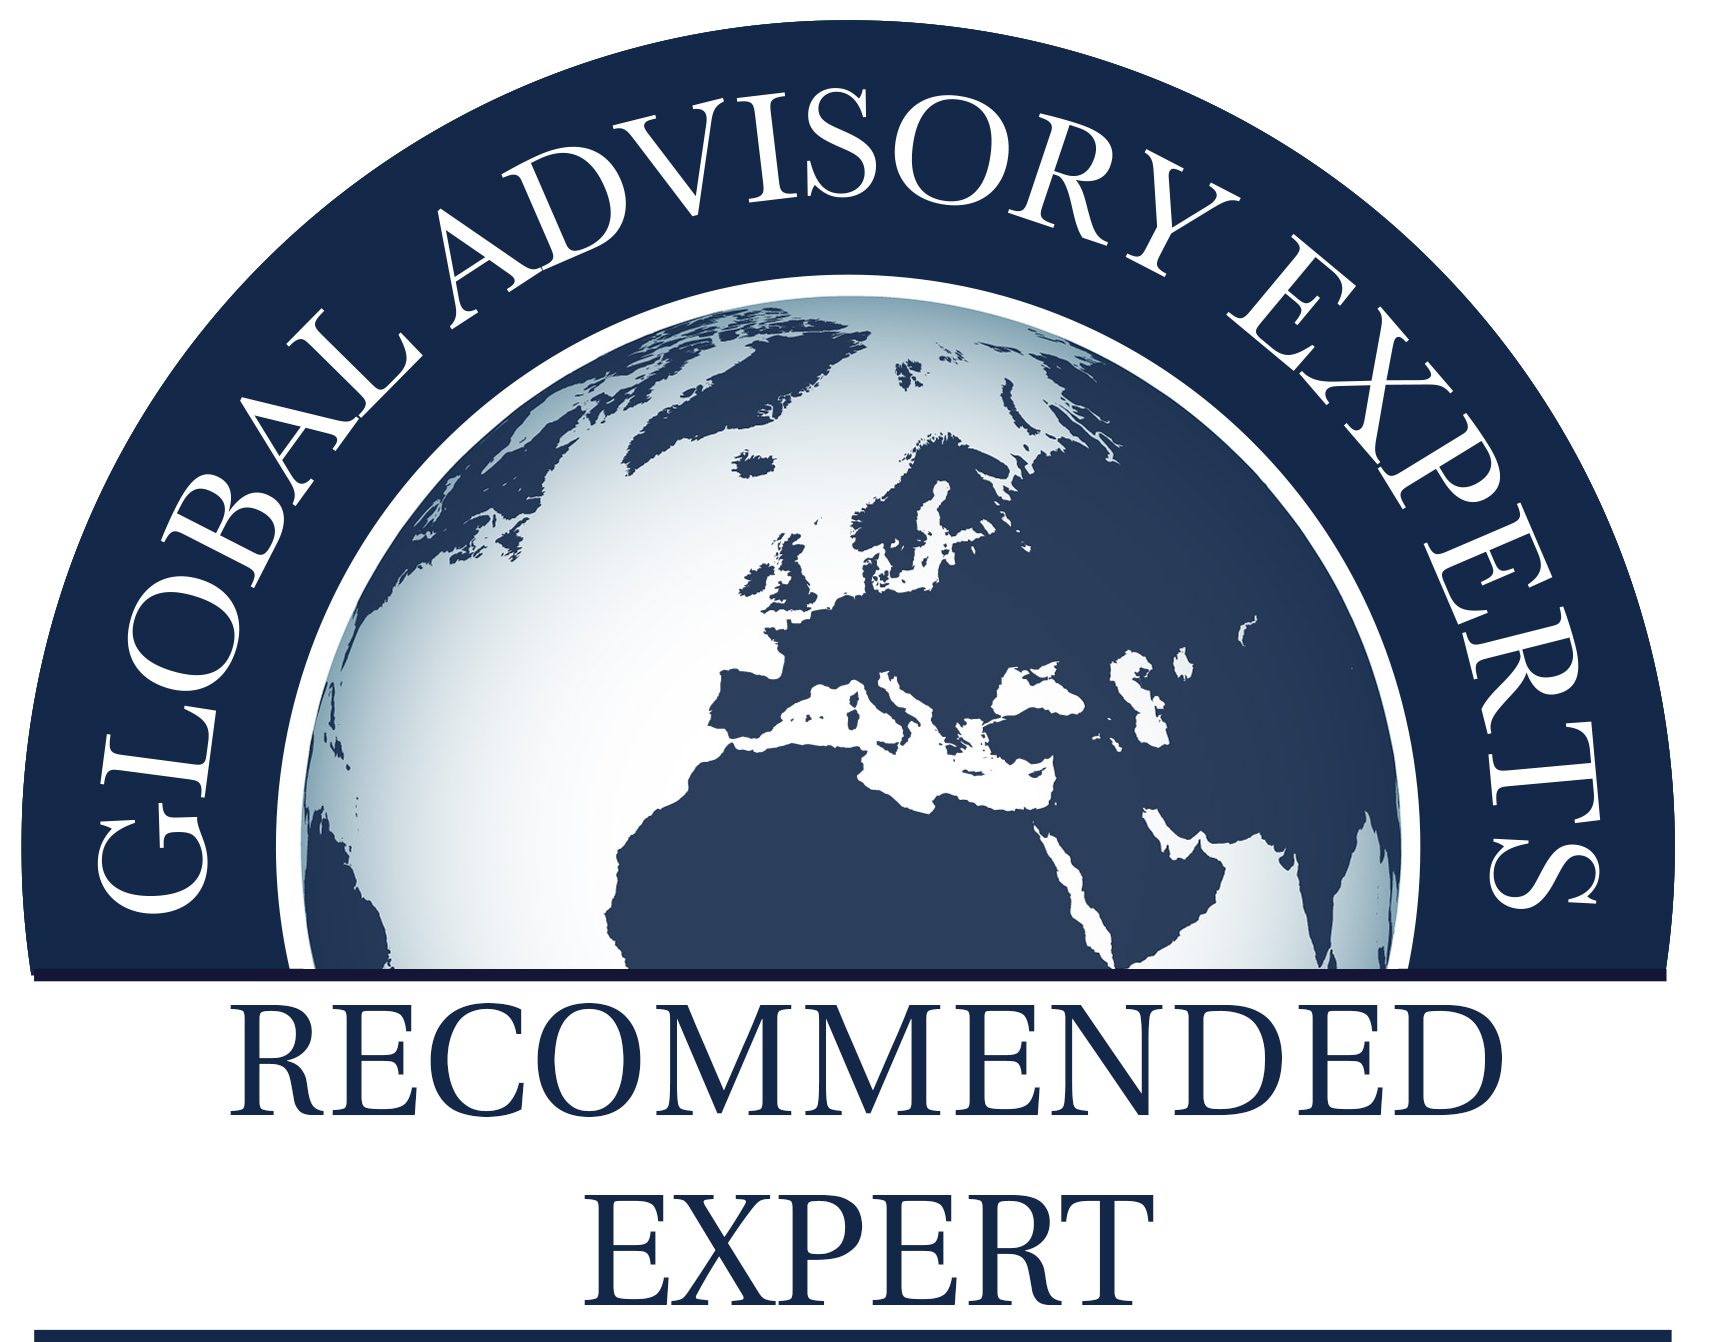 //afs.gr/wp-content/uploads/2023/02/GLOBAL-ADVISORY-EXPERTS-RECOMMENDED-EXPERT.png